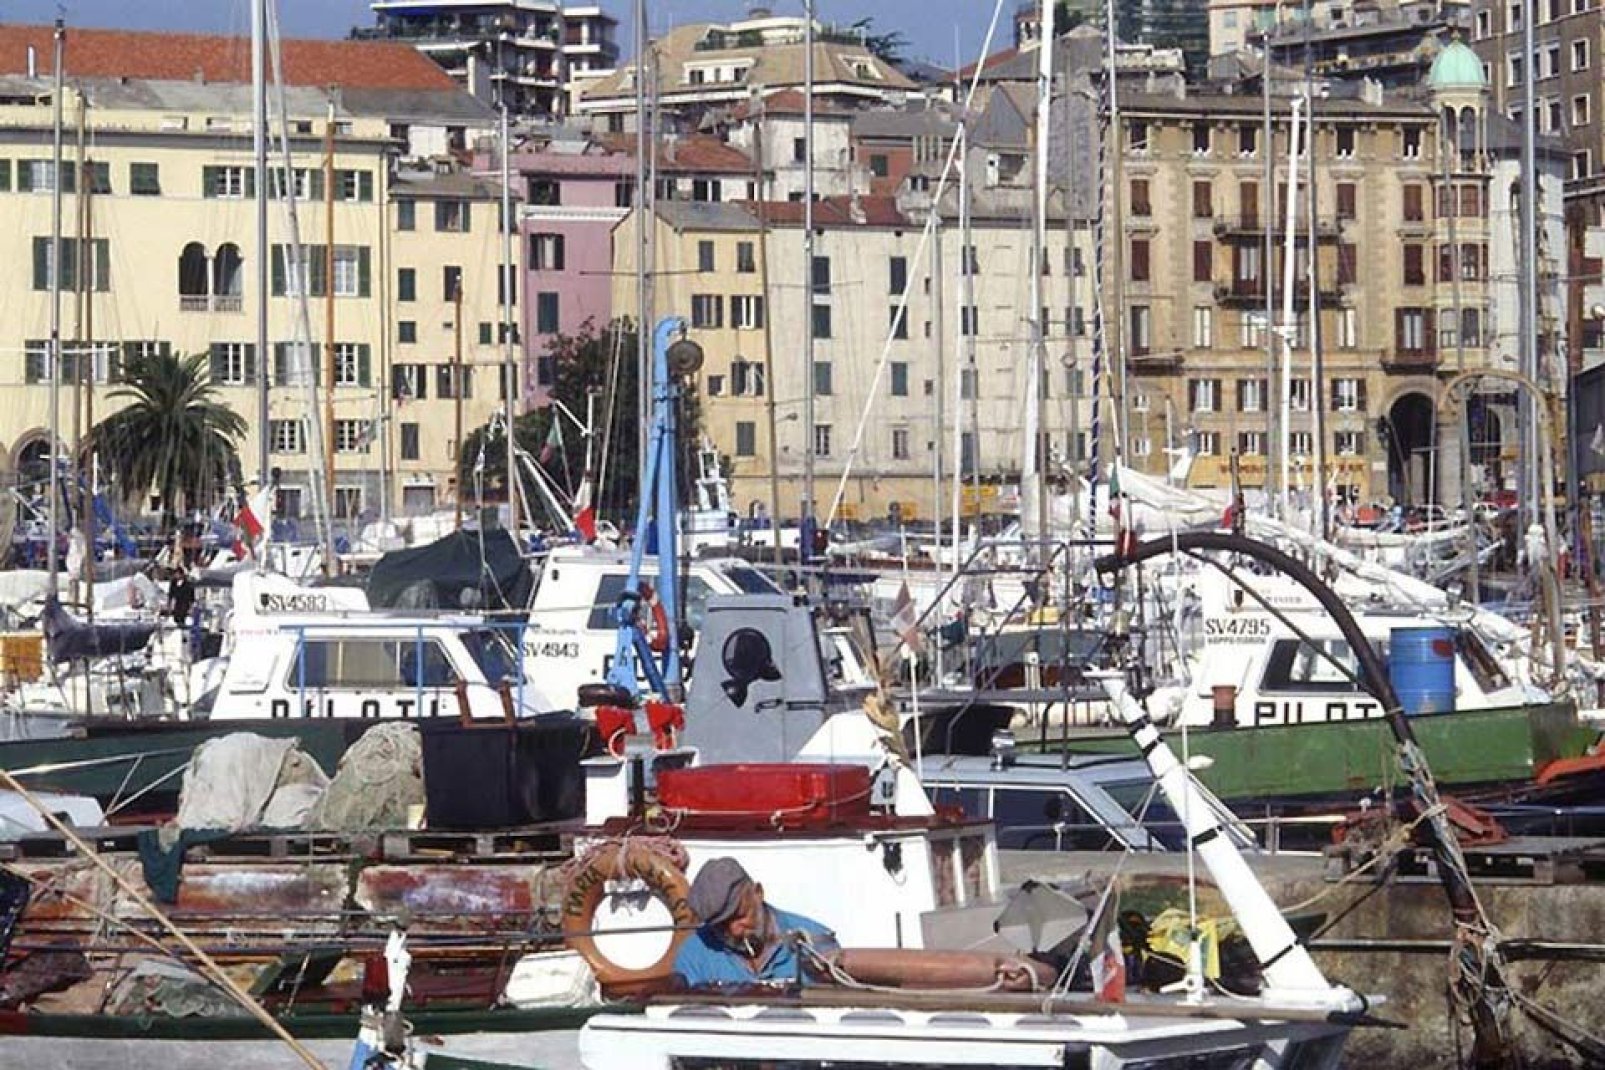 The second biggest port in Liguria after that of Genova, the port of Savona is one of the biggest in Italy.